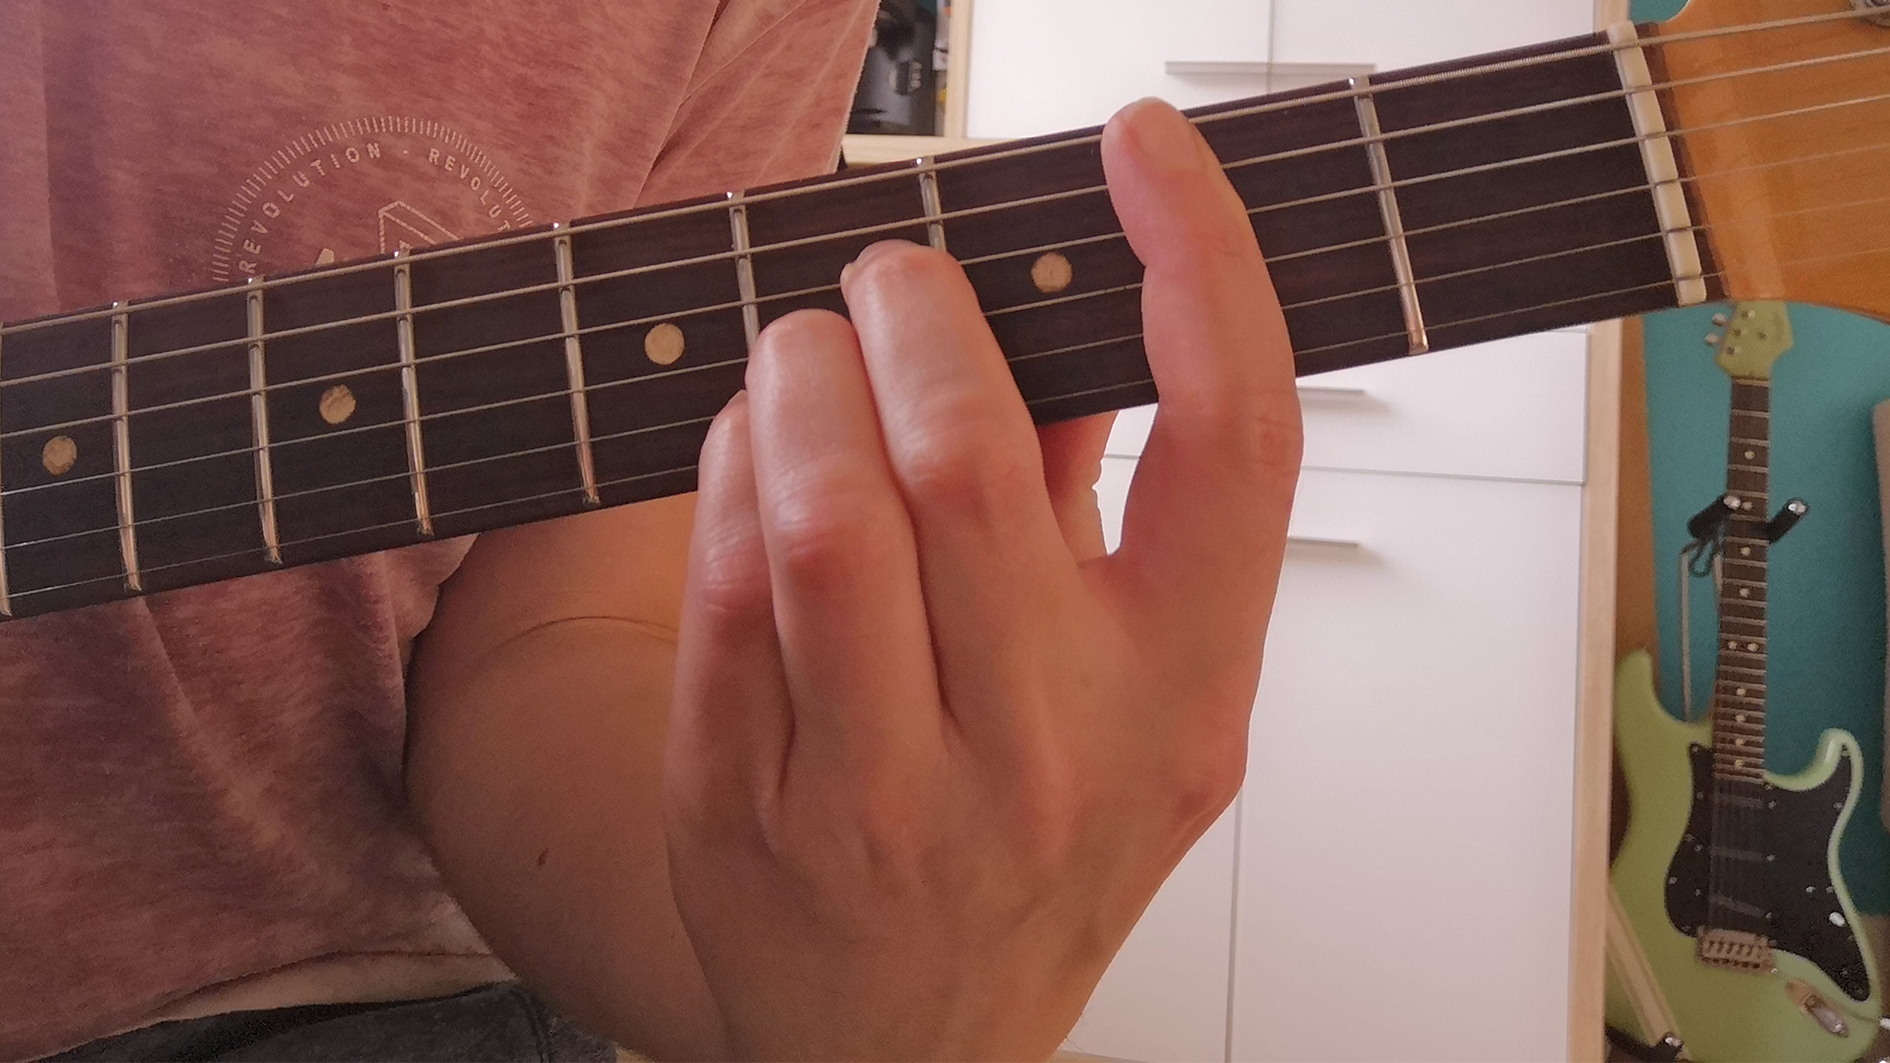 how to play the guitar chords